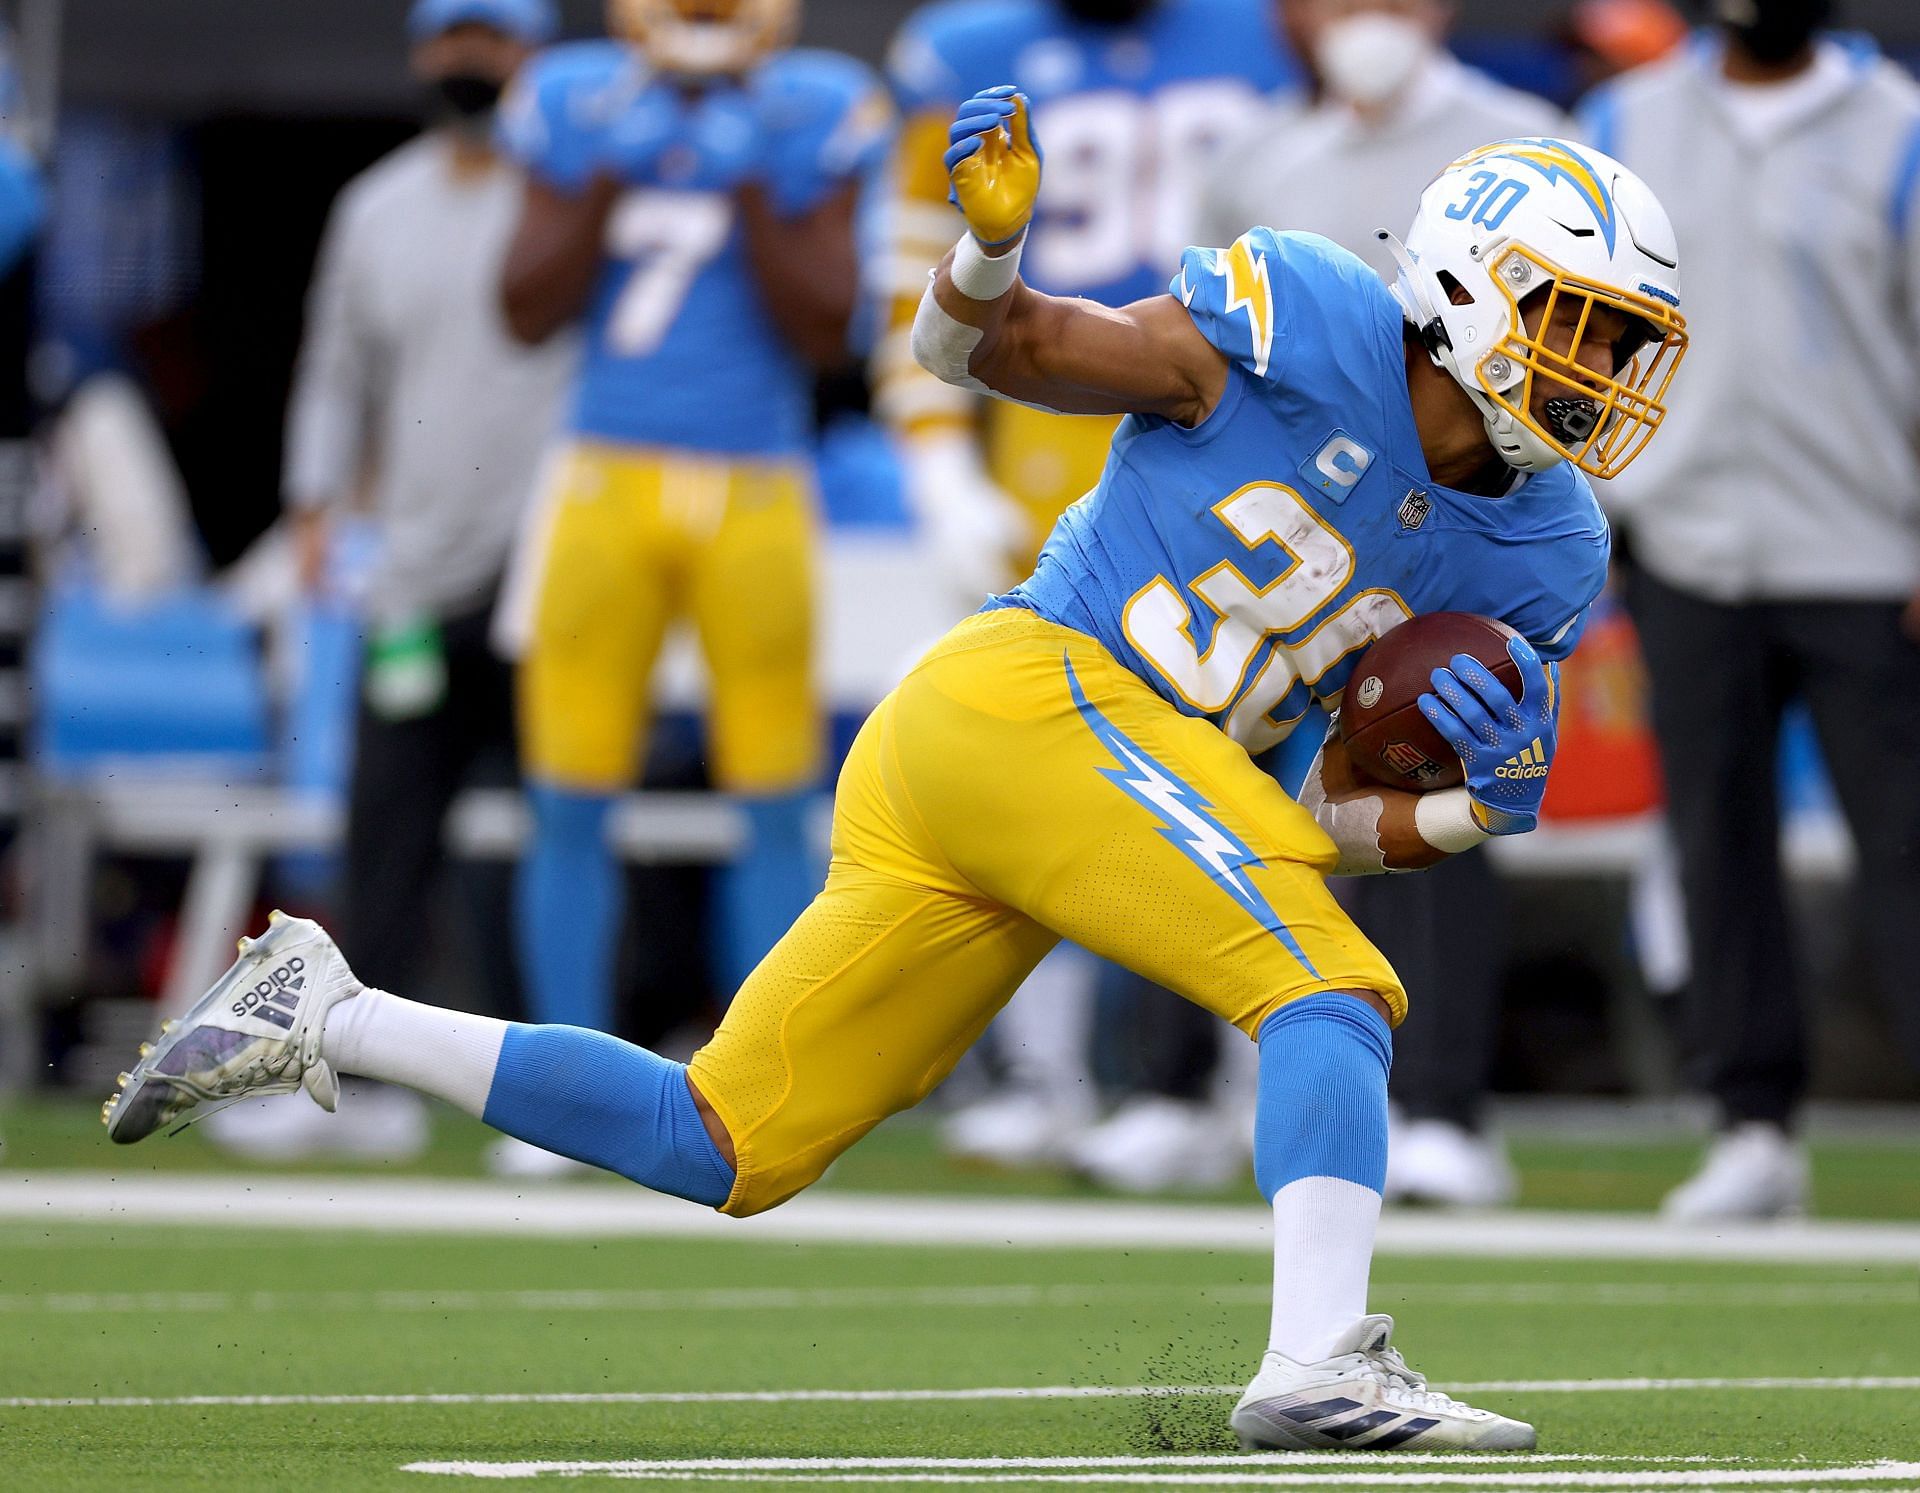 The best passcatching running backs in the NFL